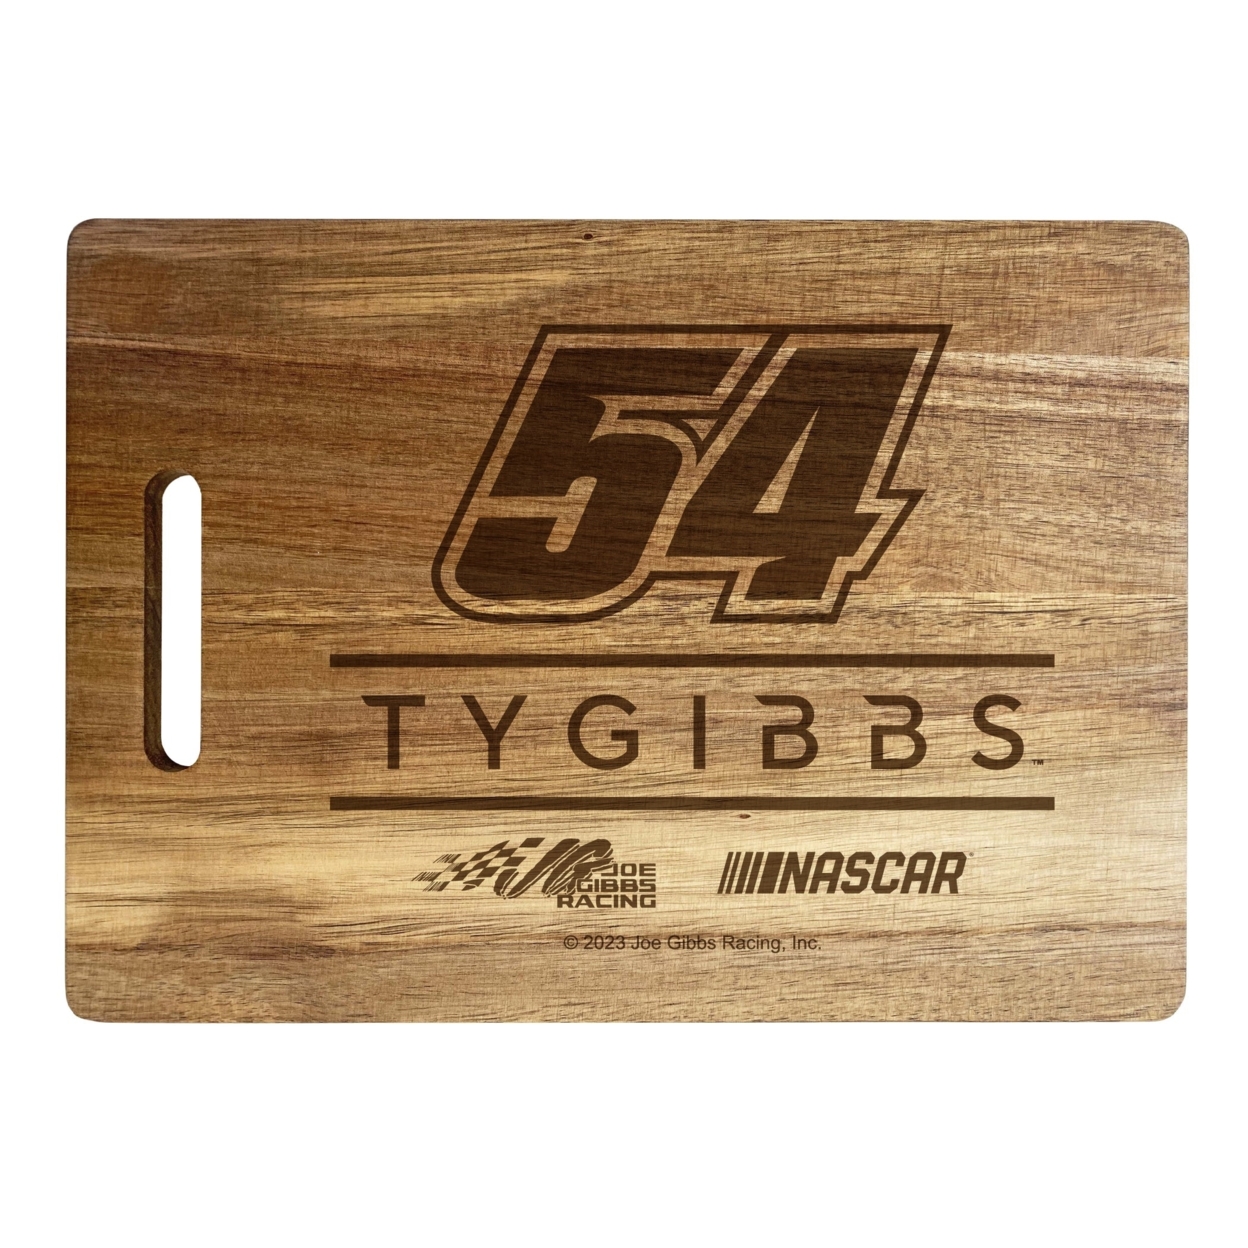 #54 Ty Gibbs NASCAR Officially Licensed Engraved Wooden Cutting Board